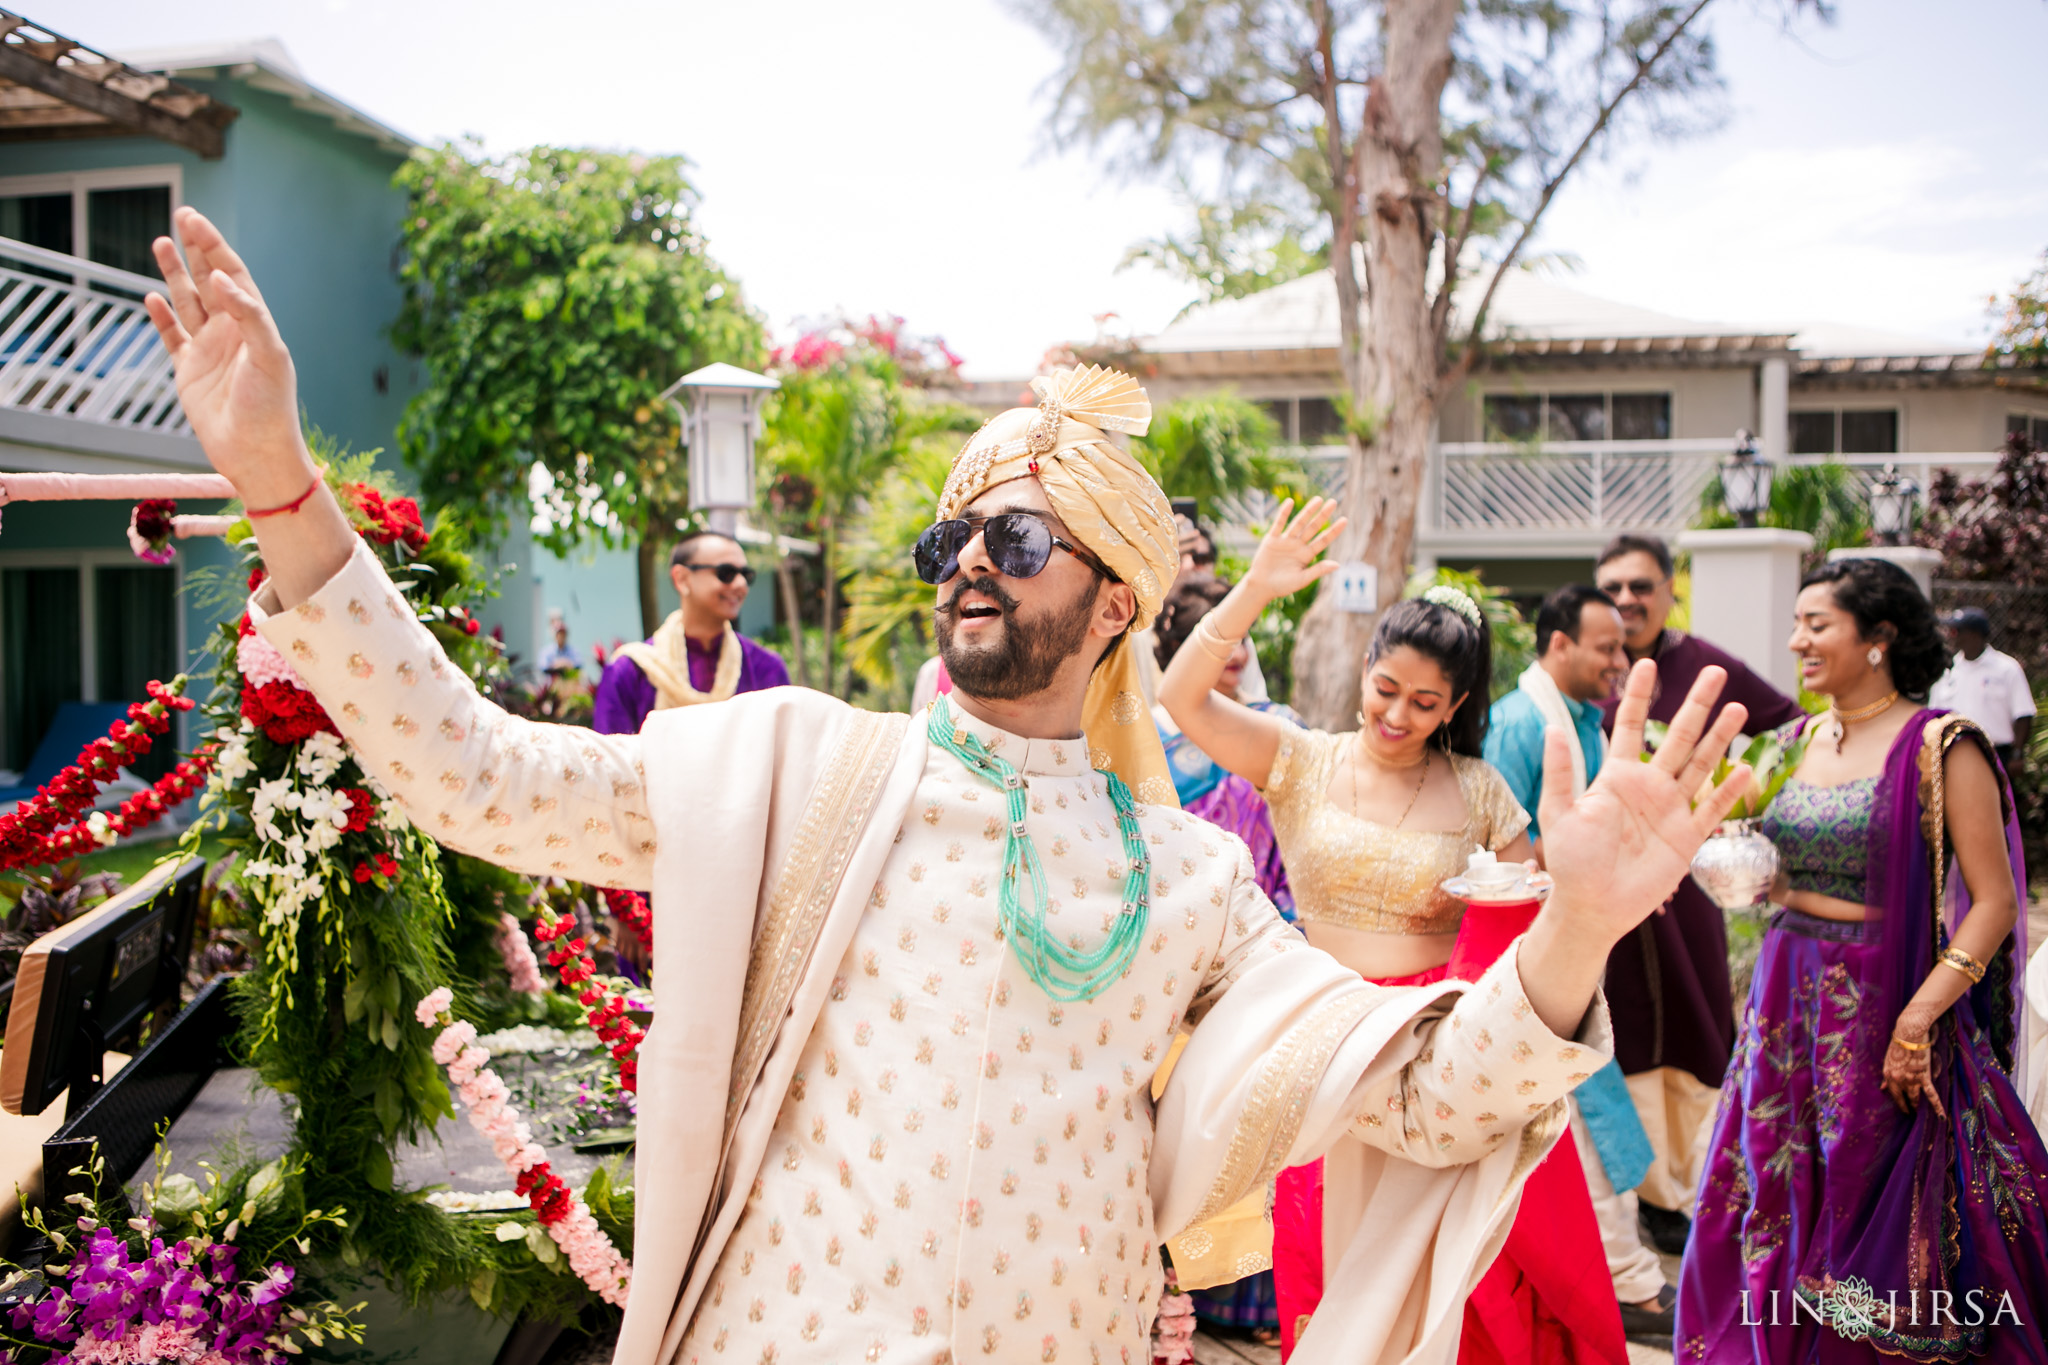 12 Turks and Caicos Travel Indian Wedding Photography